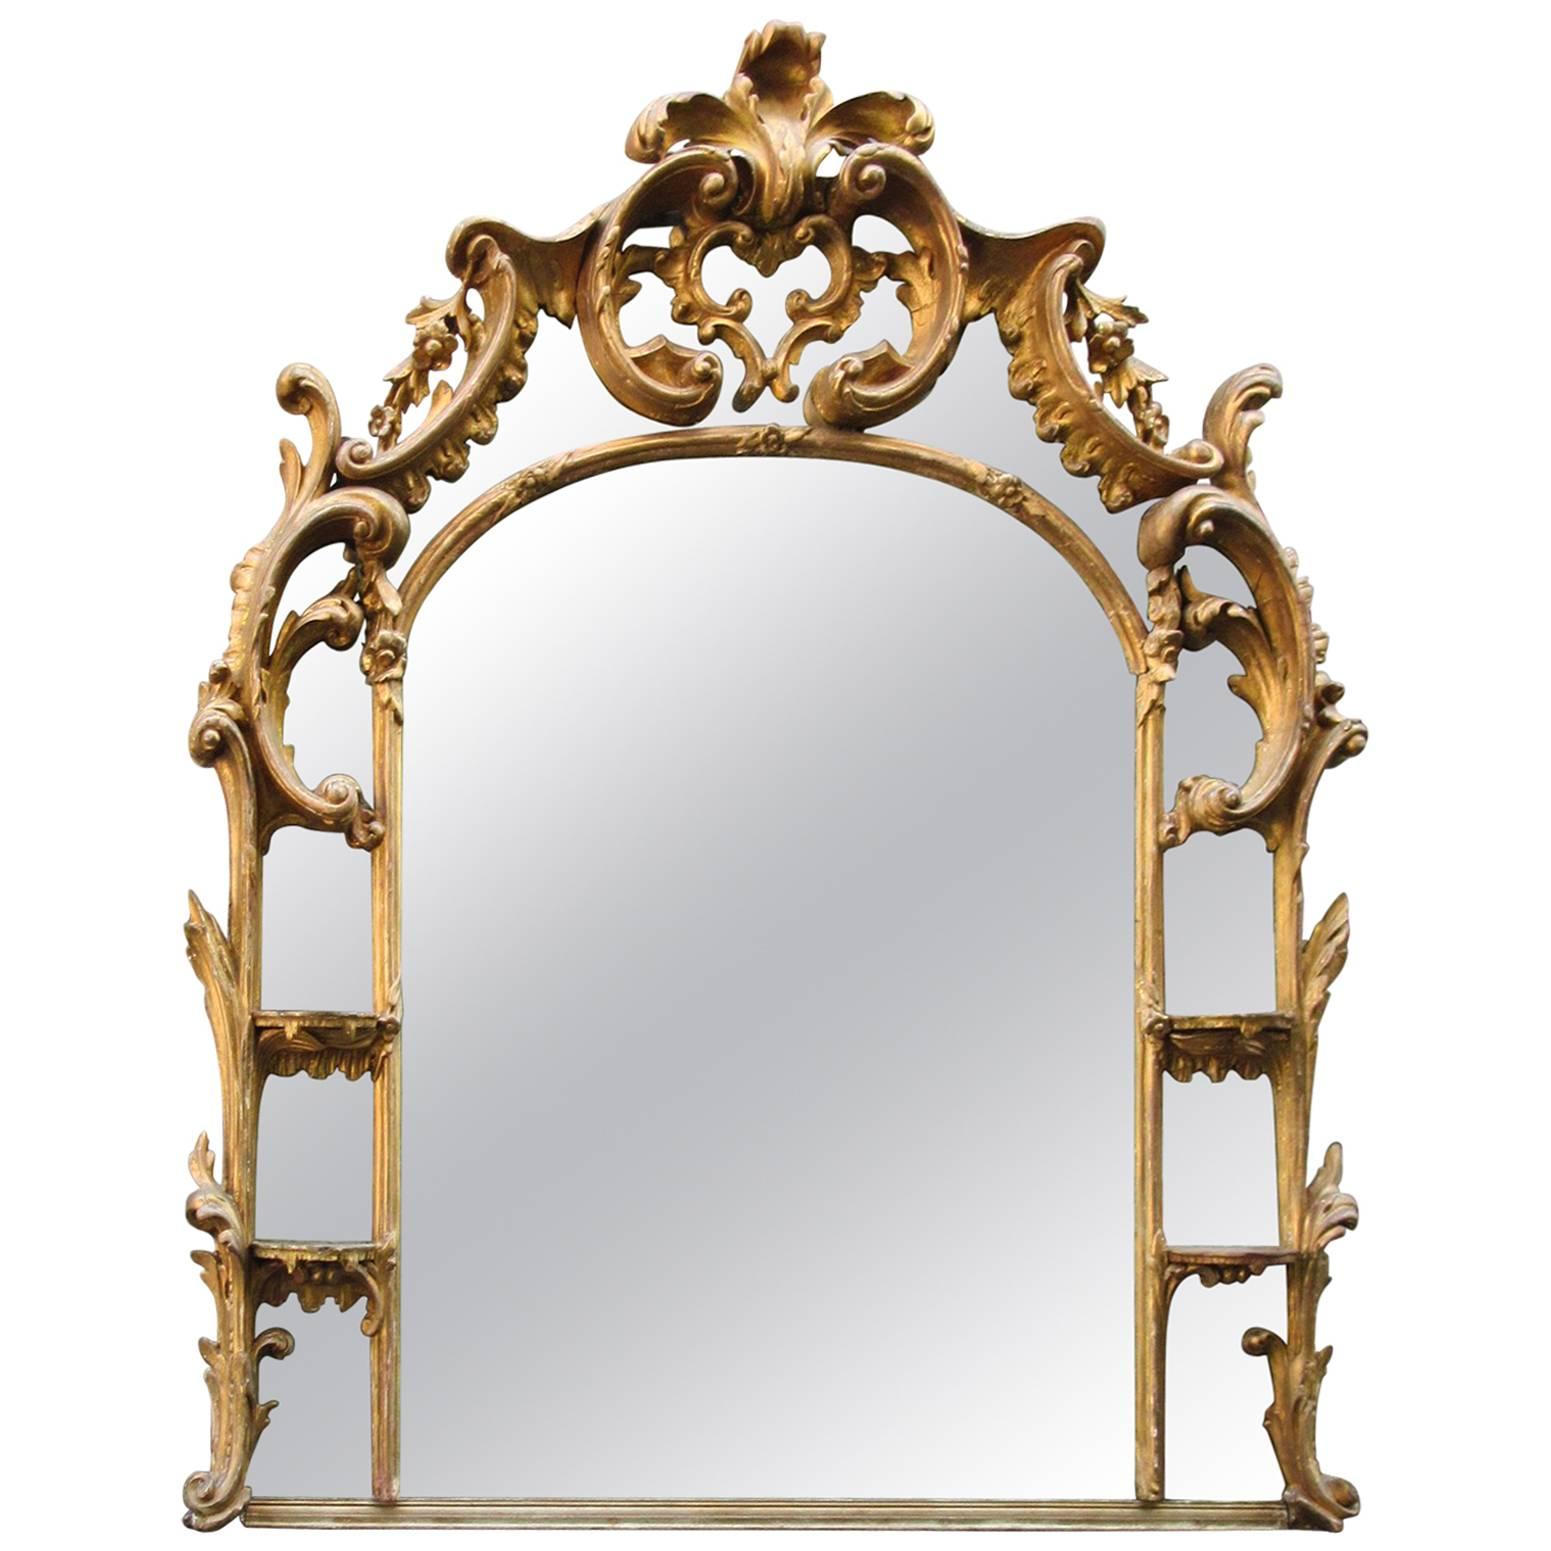 Late 18th Century English Chinoiserie Giltwood Overmantel Mirror